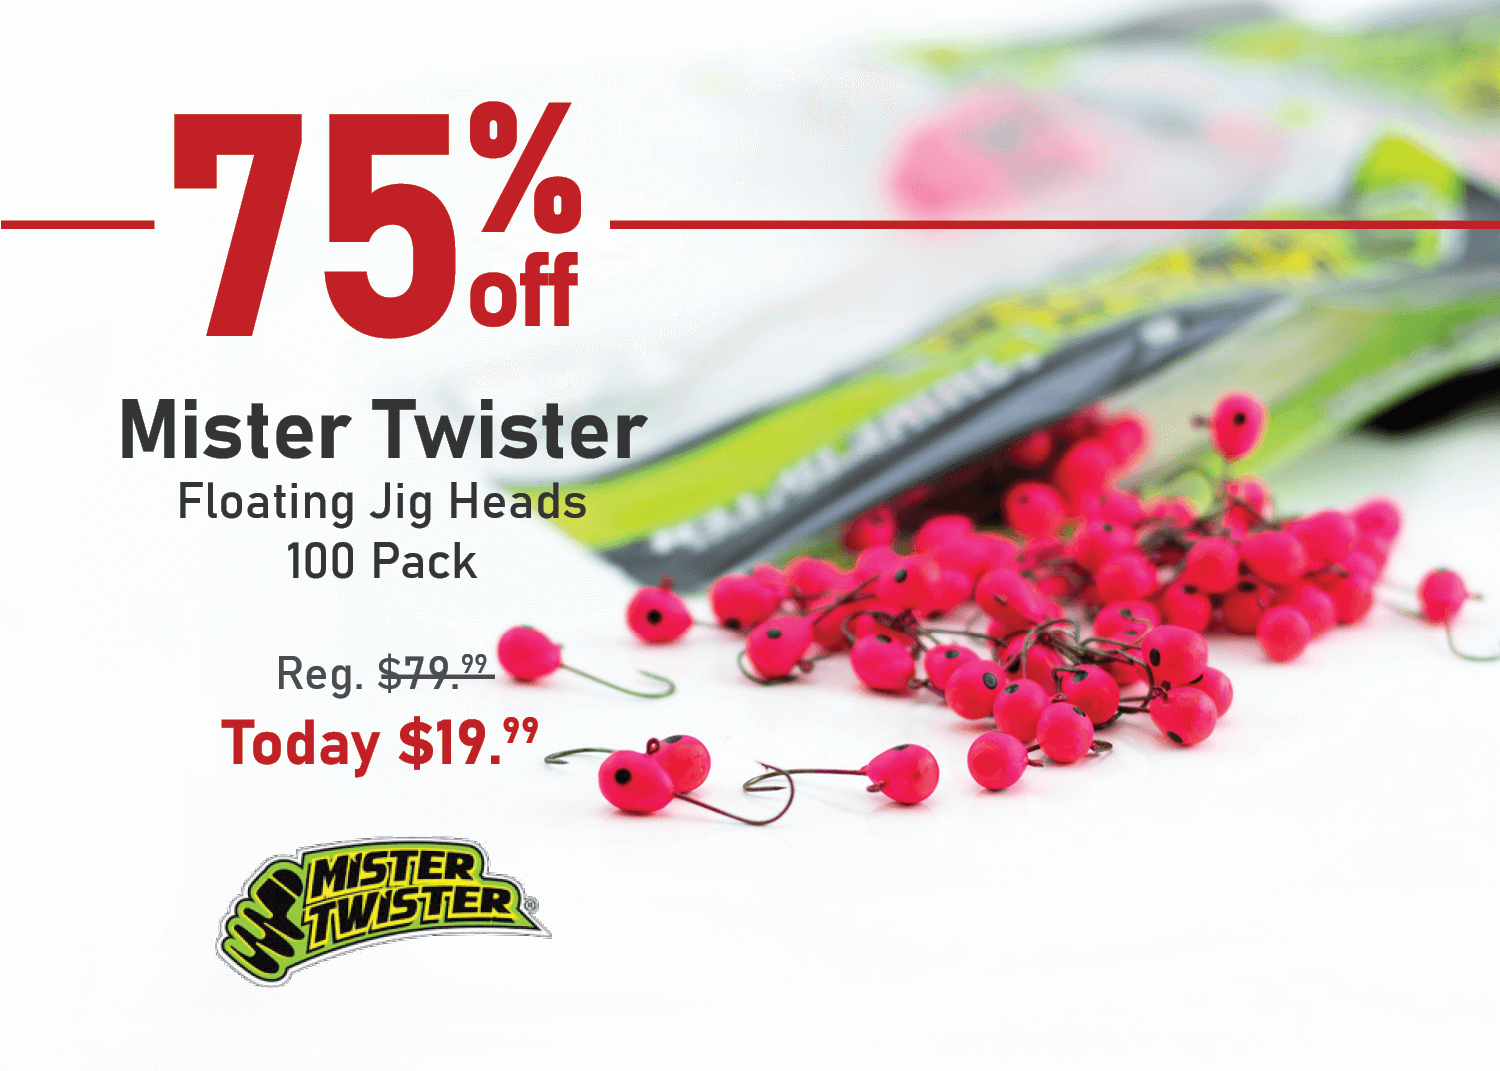 Take 75% off Mister Twister Floating Jig Heads - 100 Pack